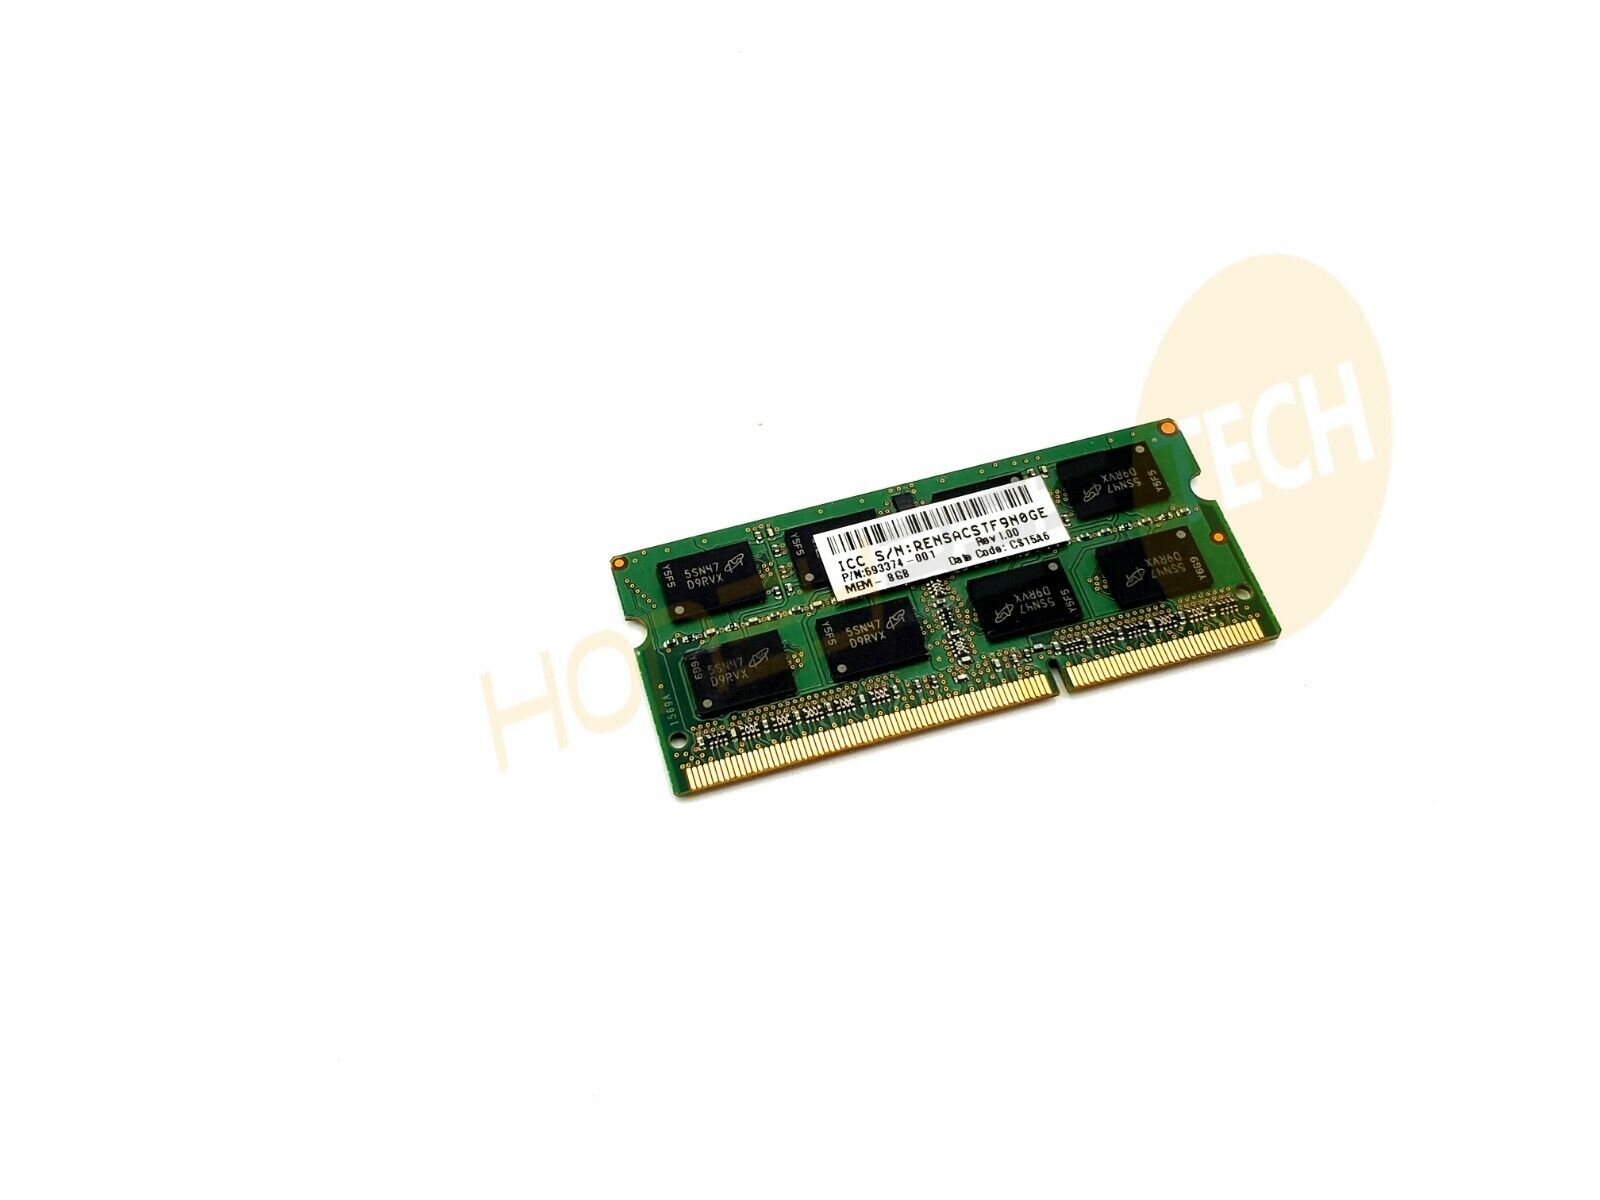 GENUINE HP 8GB 2RX8 PC3L-12800S 1600MHZ DDR3 SODIMM MEMORY RAM 693374-001 TESTED